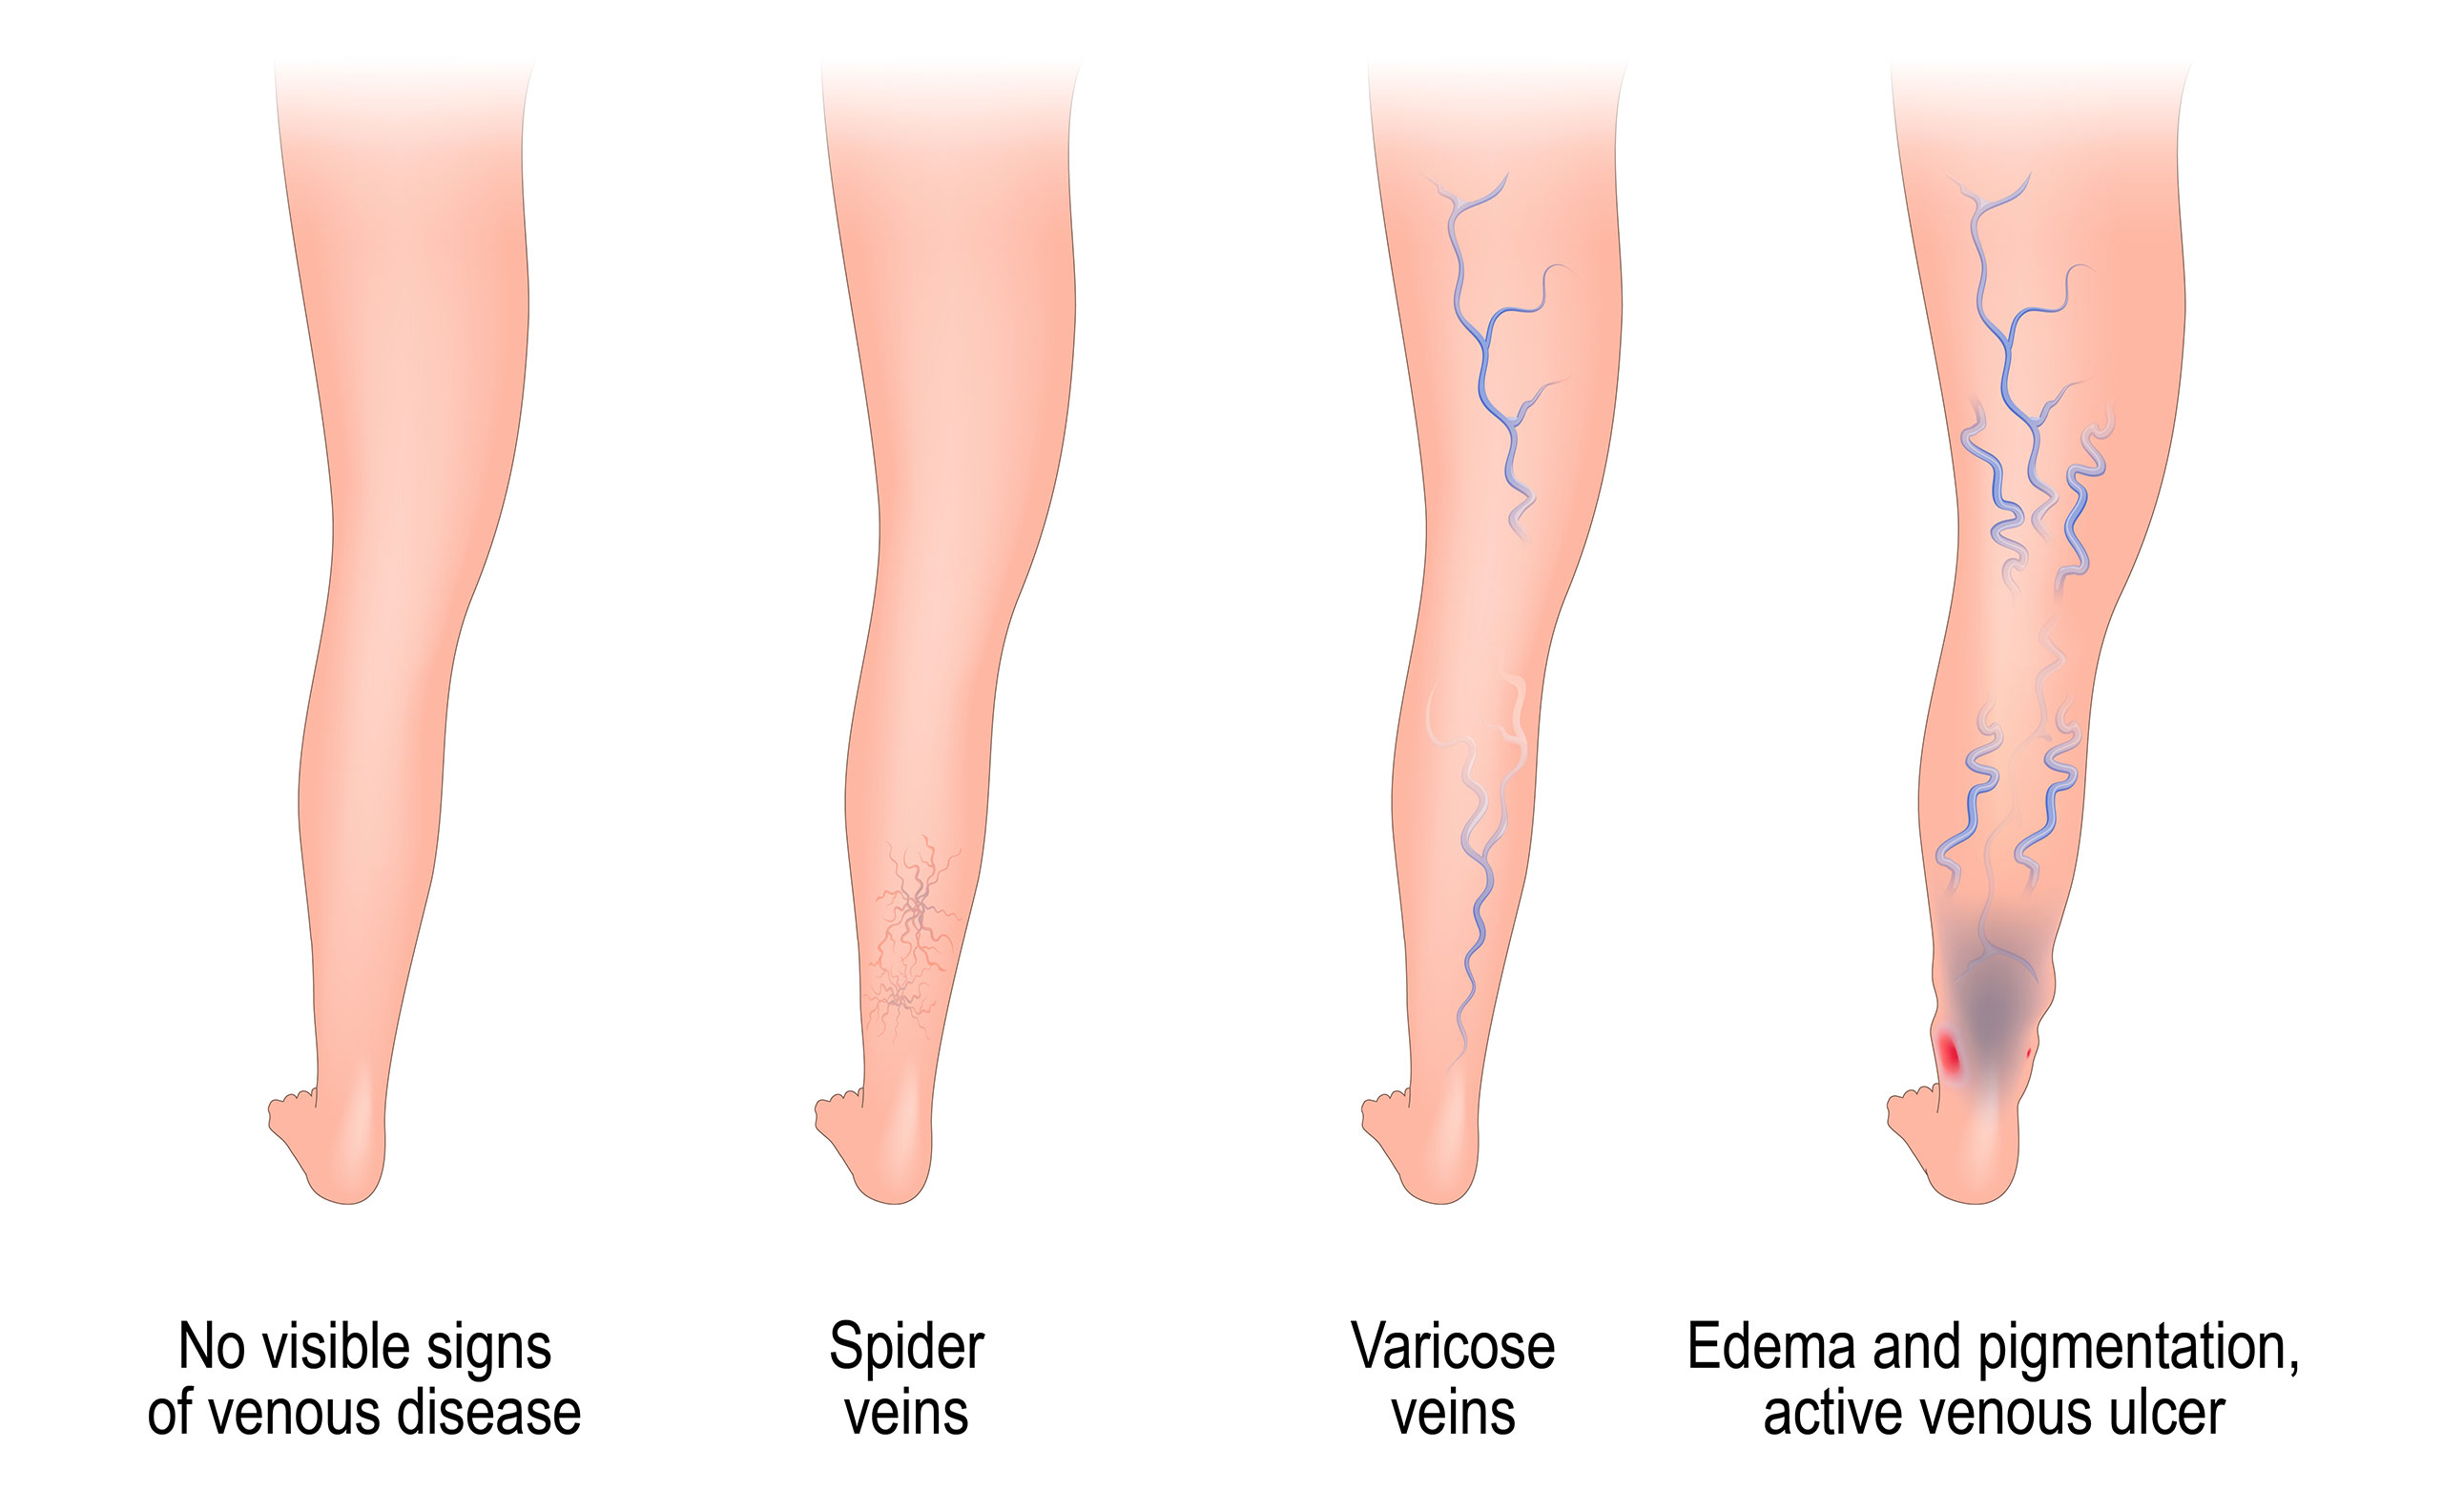 Venous stasis ulcers